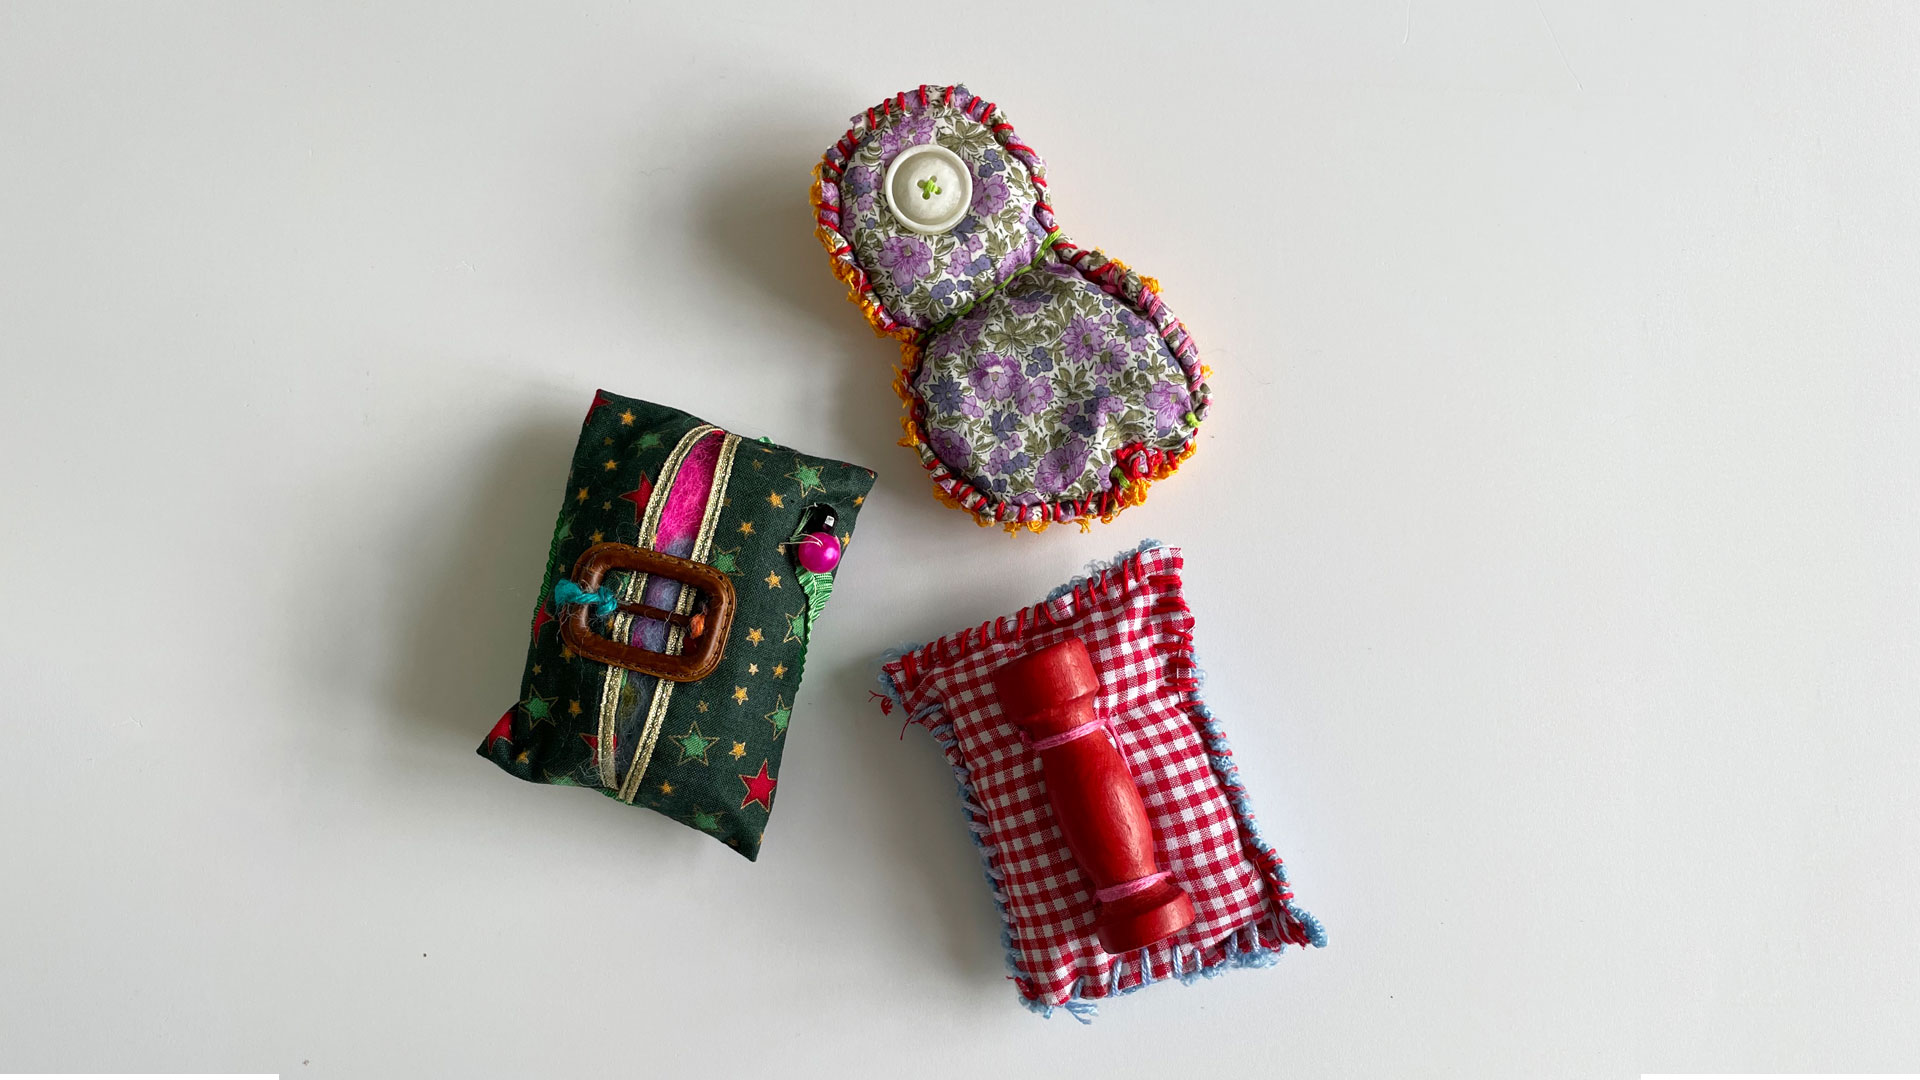 3 padded fabric shapes adorned with small objects, buttons and beads rest on a light background